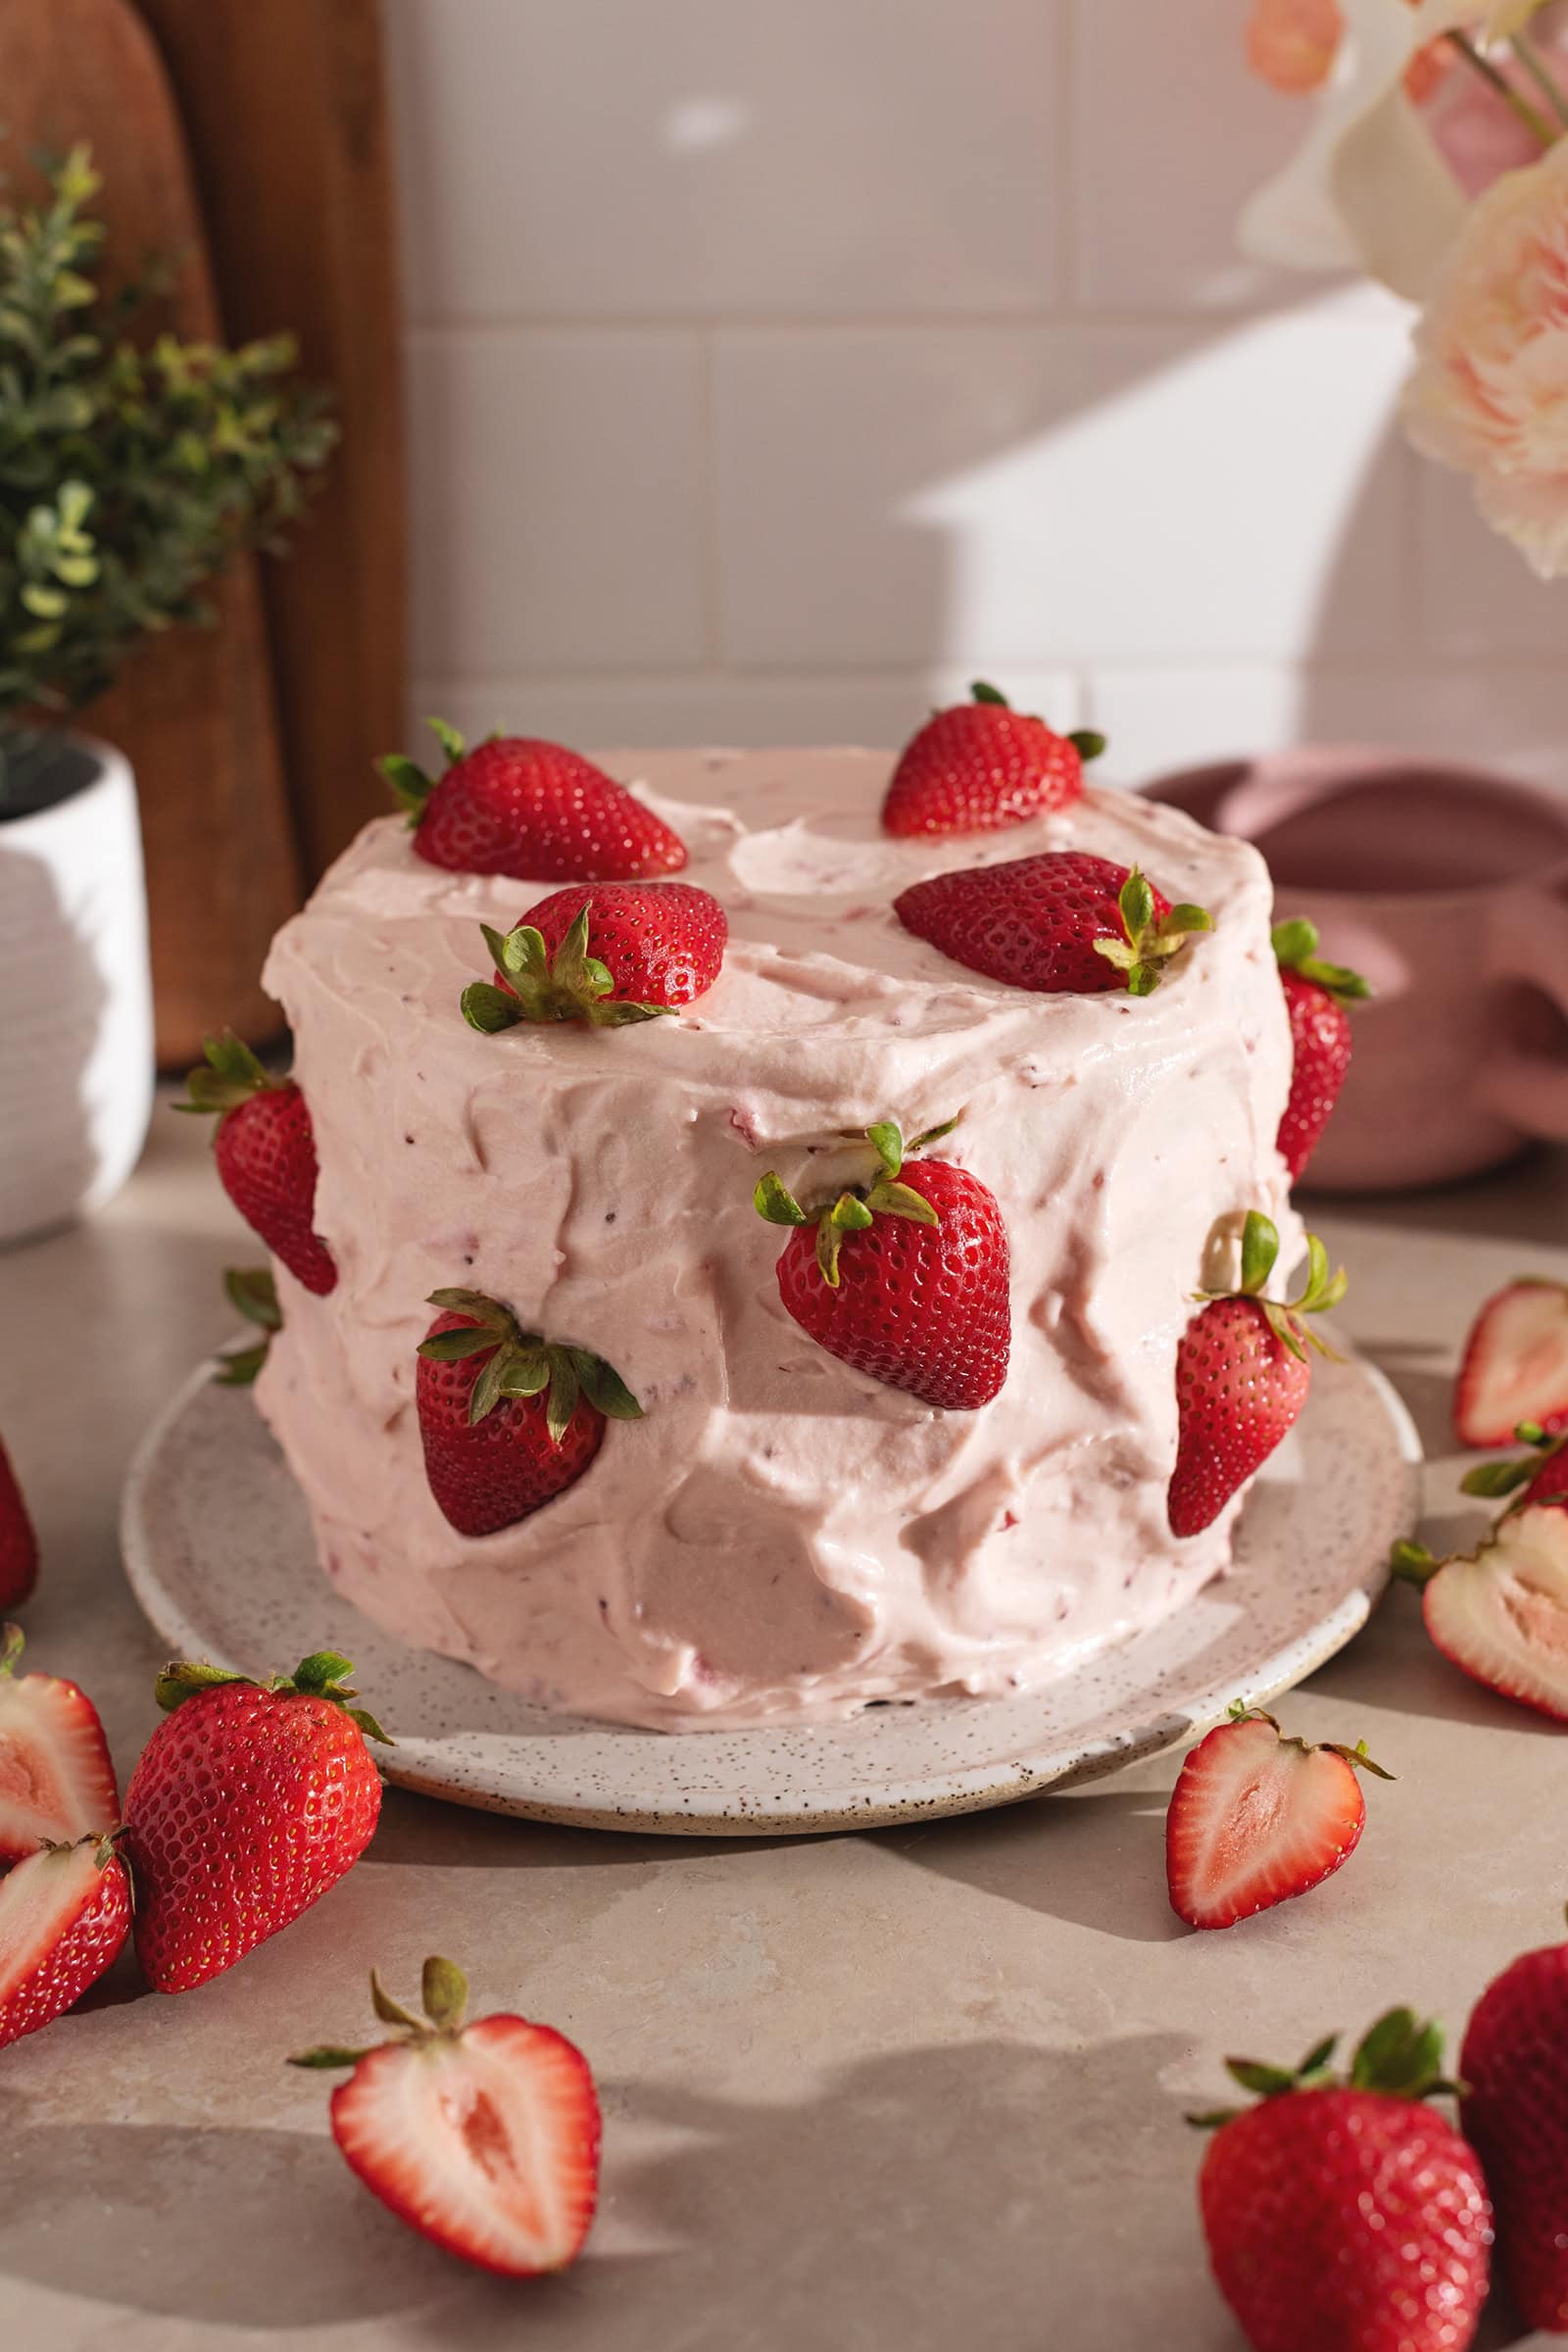 A cake covered in strawberry frosting and fresh strawberries on a plate surrounded by more strawberries.